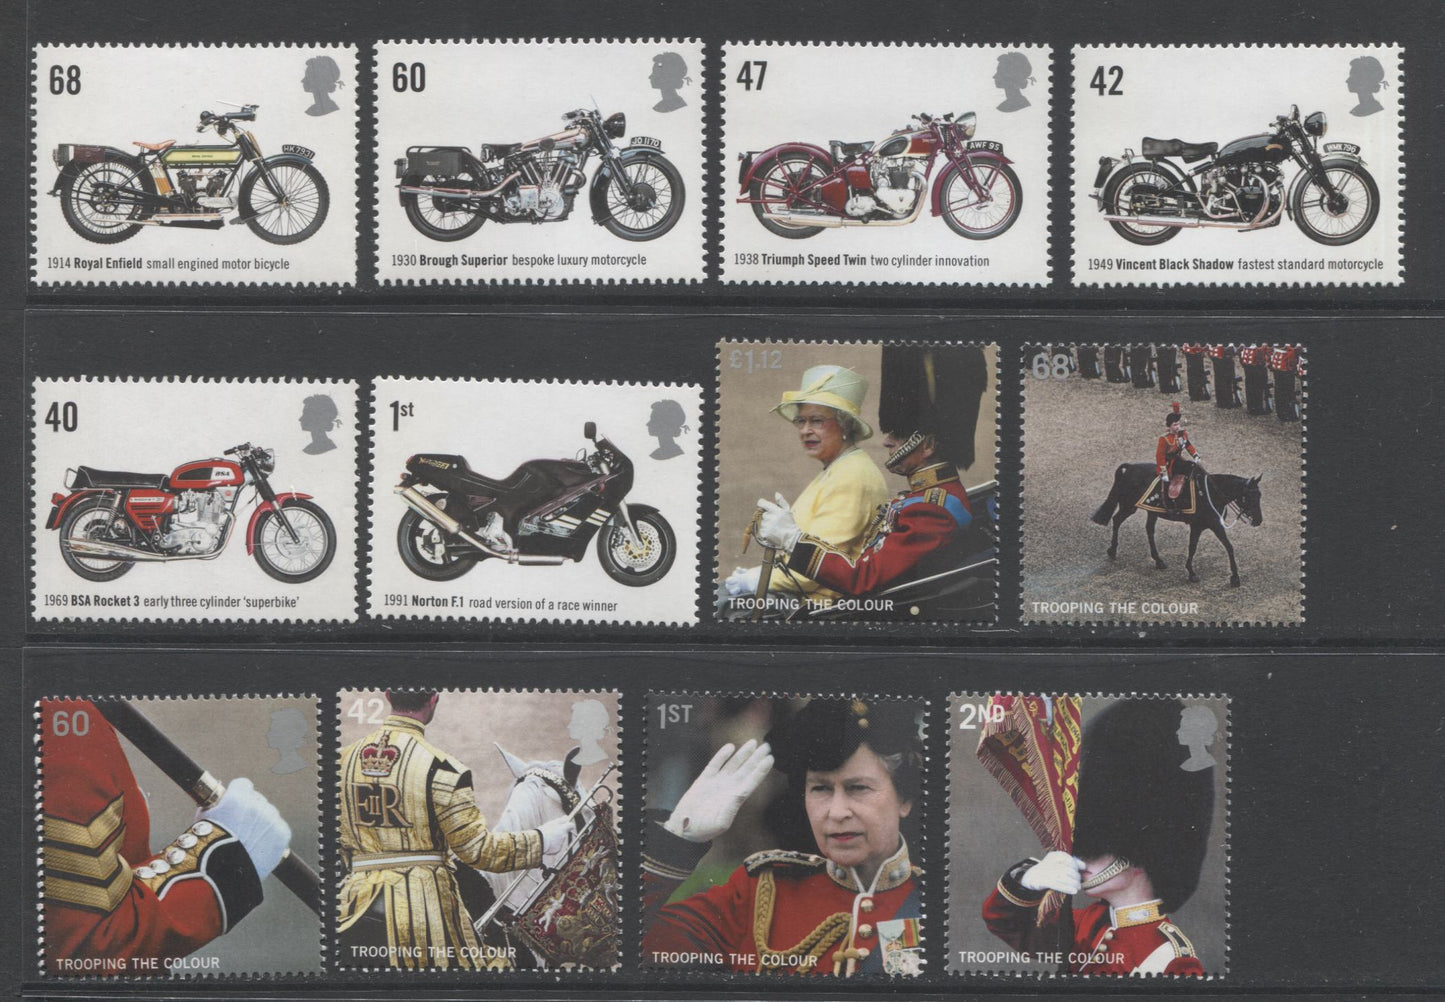 Lot 68 Great Britain SC#2288-2293, 2295-2300, 2005 Motocycle & Royal Guard Issues, 12 VFNH Singles On DF Paper. 2006 Scott Cat $22.75 USD, Click on Listing to See ALL Pictures